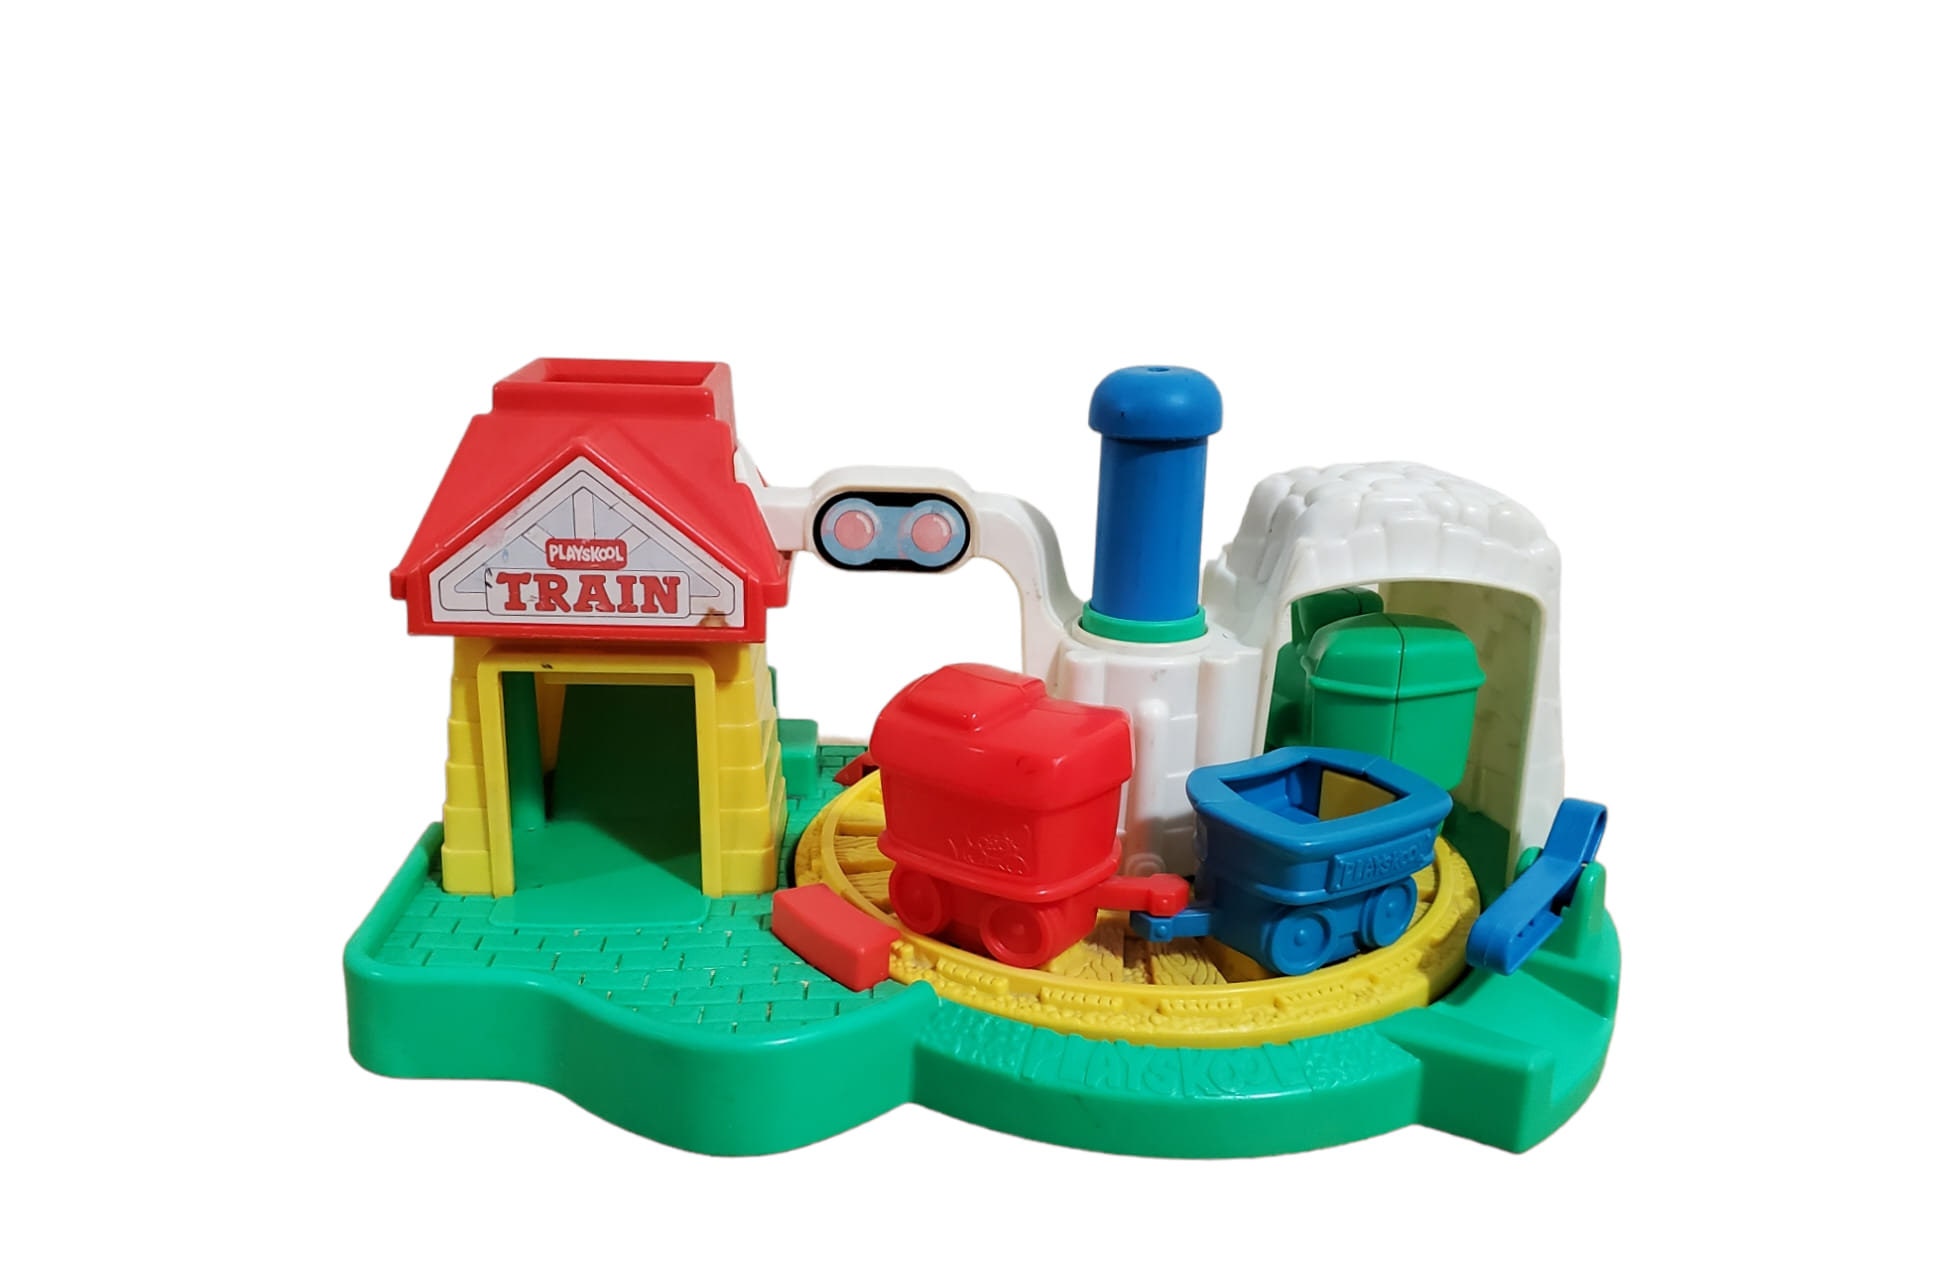 1990 Playskool Push and Go Toy Train Stain Trains, Pretend Play - Etsy